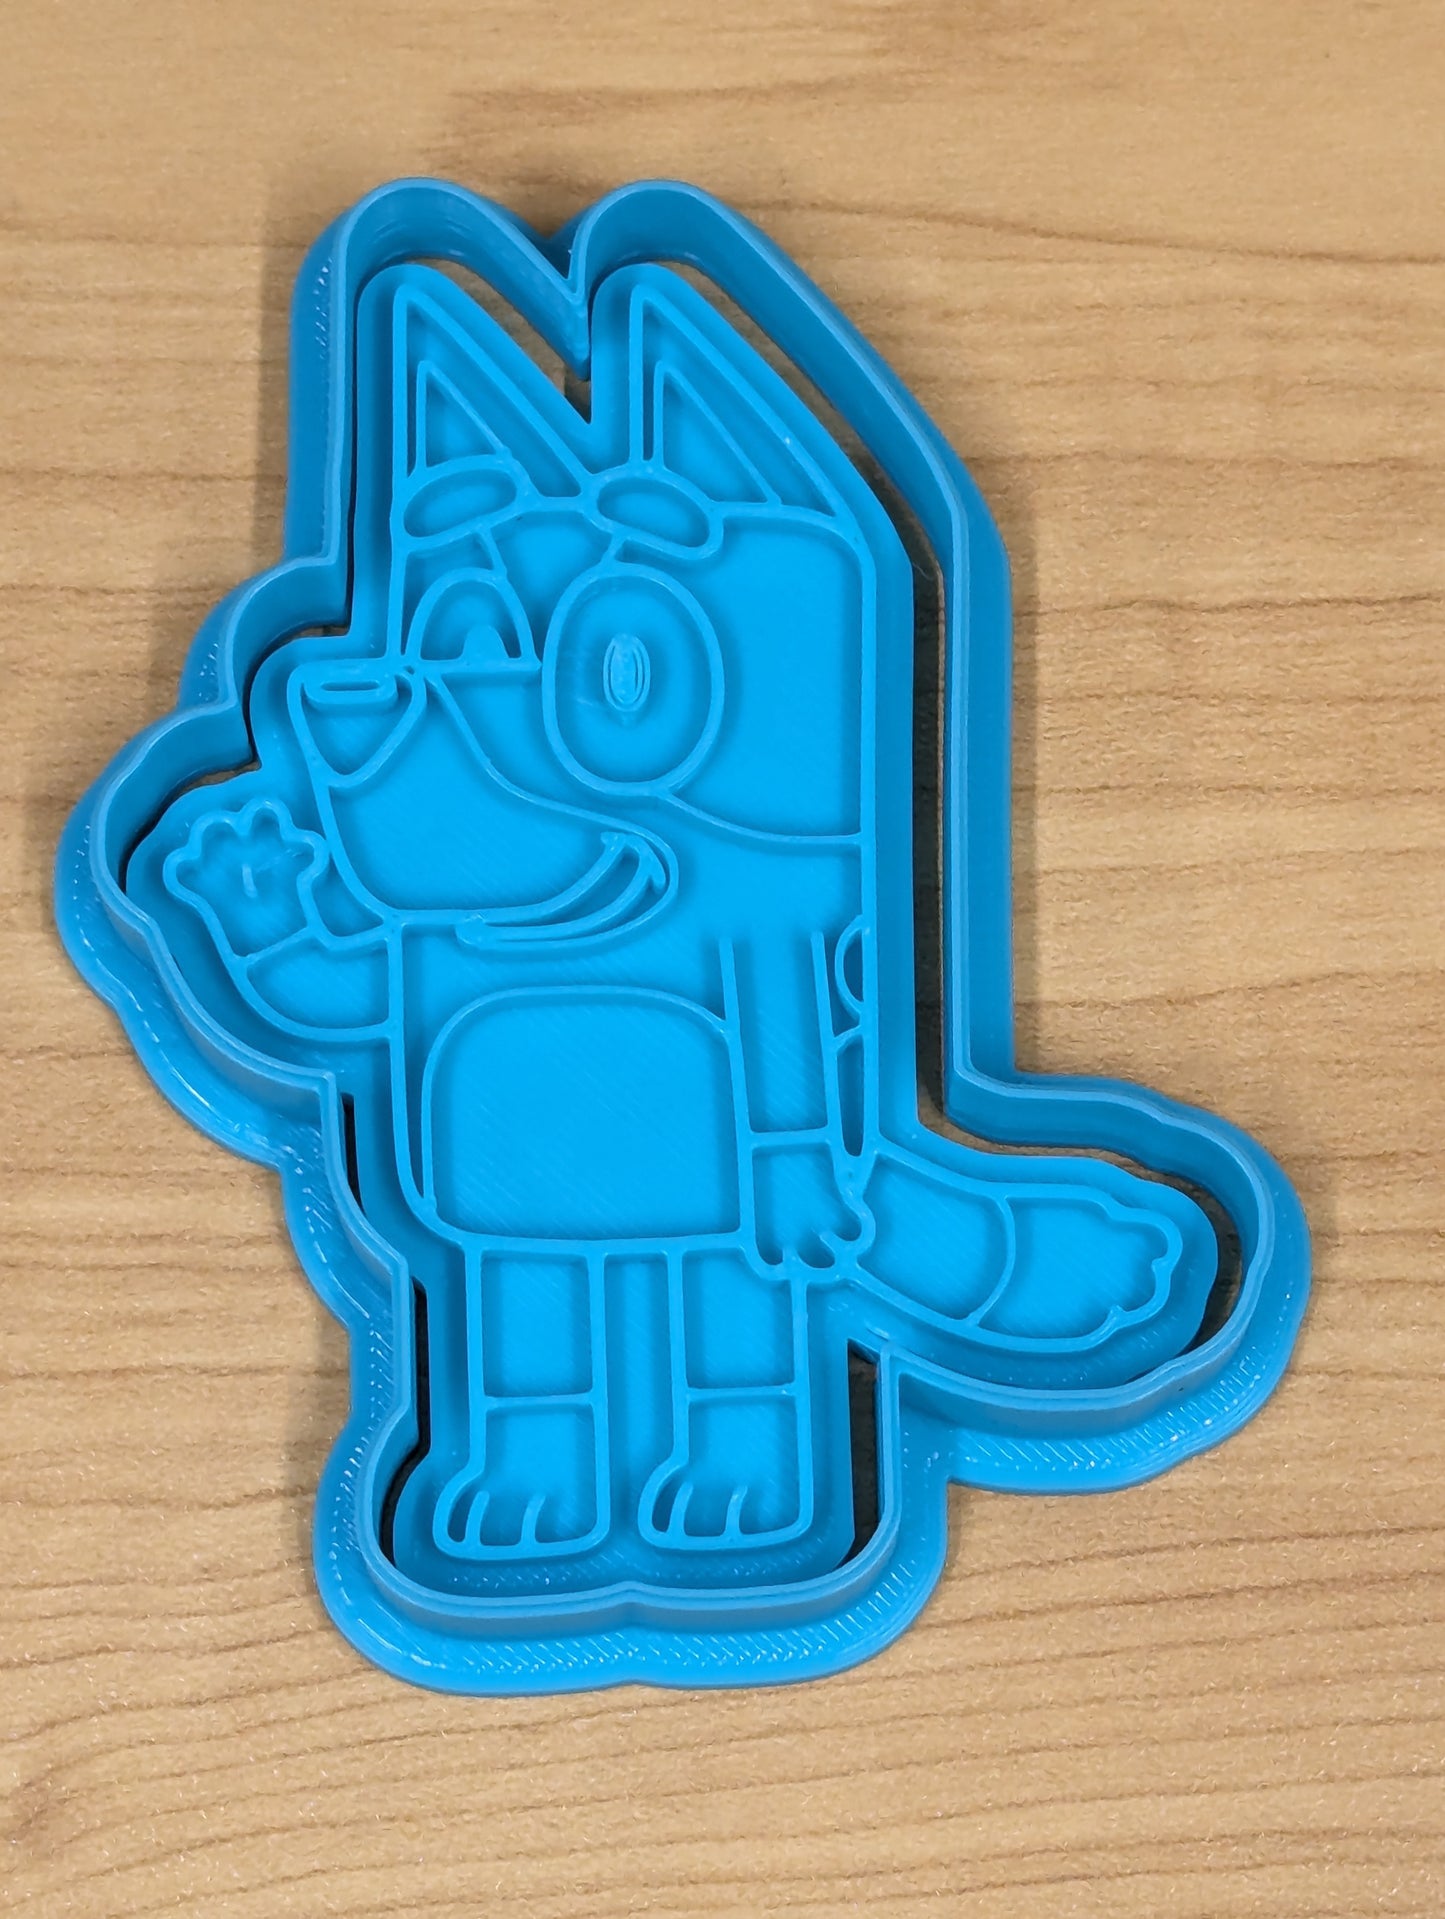 Bluey Cookie Cutter and Embosser - 8.7cm x 6.7cm